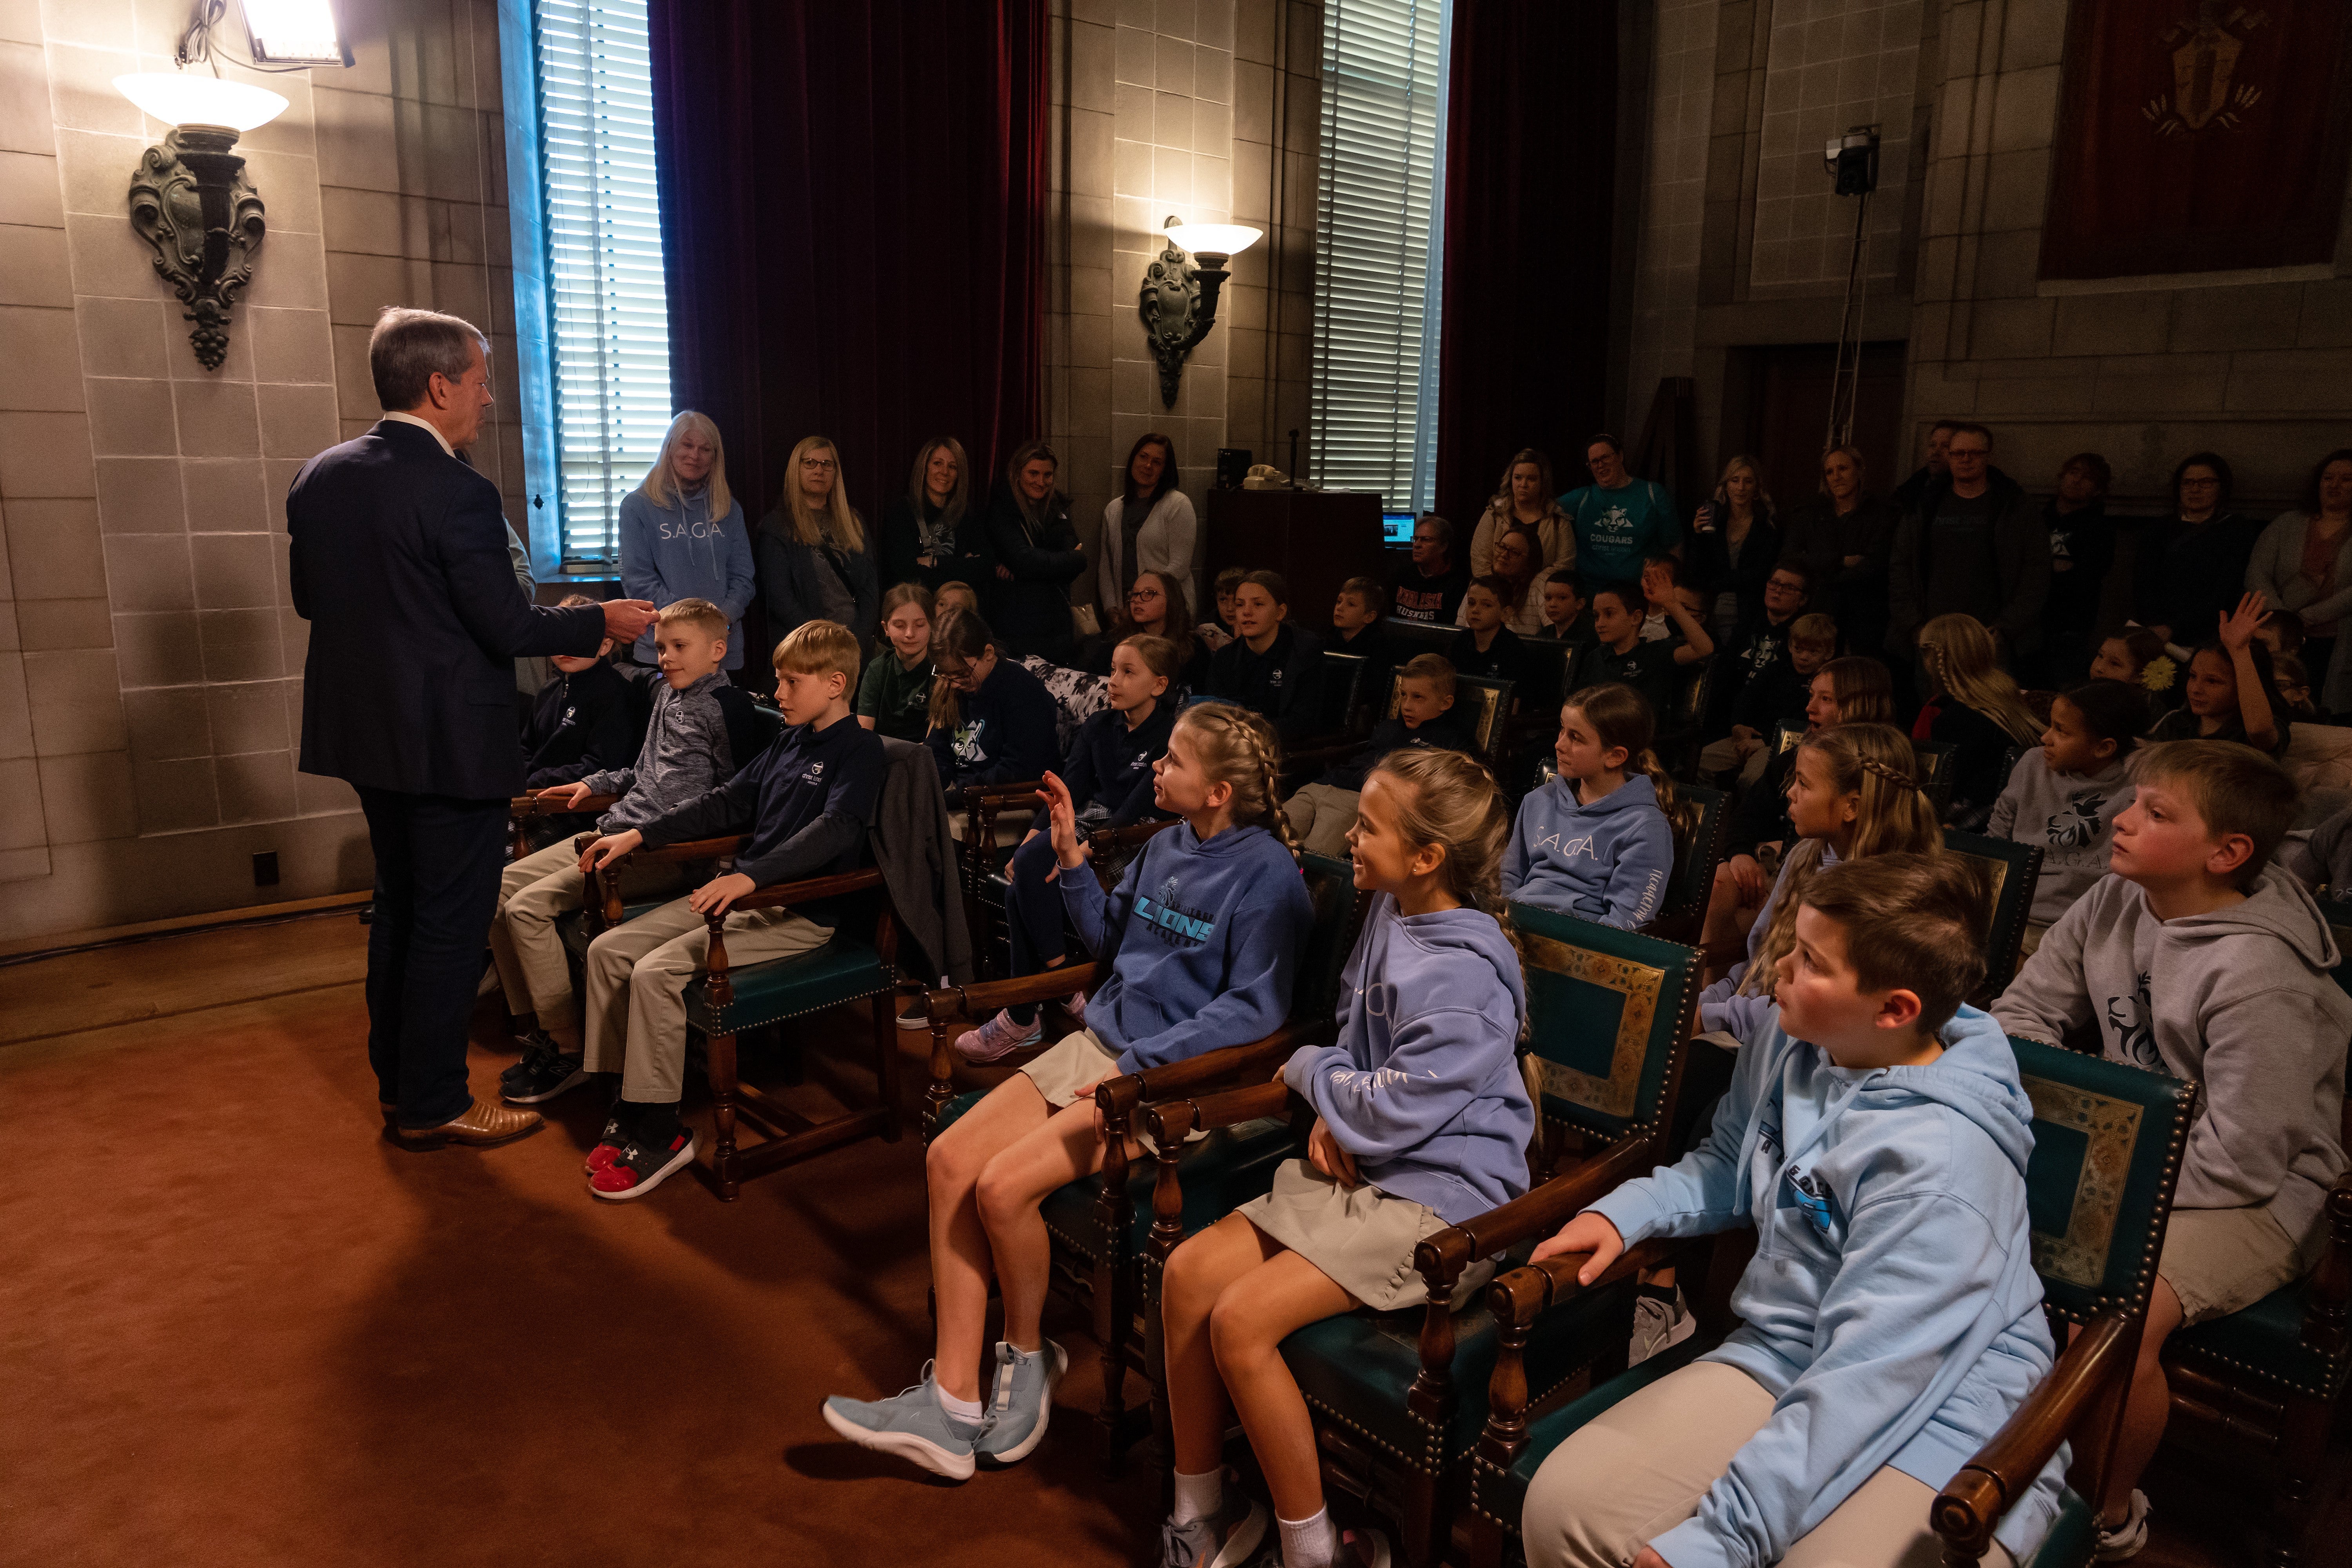 Governor Jim Pillen was joined by fourth graders to help celebrate Nebraska’s 156th Statehood Birthday and National Pig Day